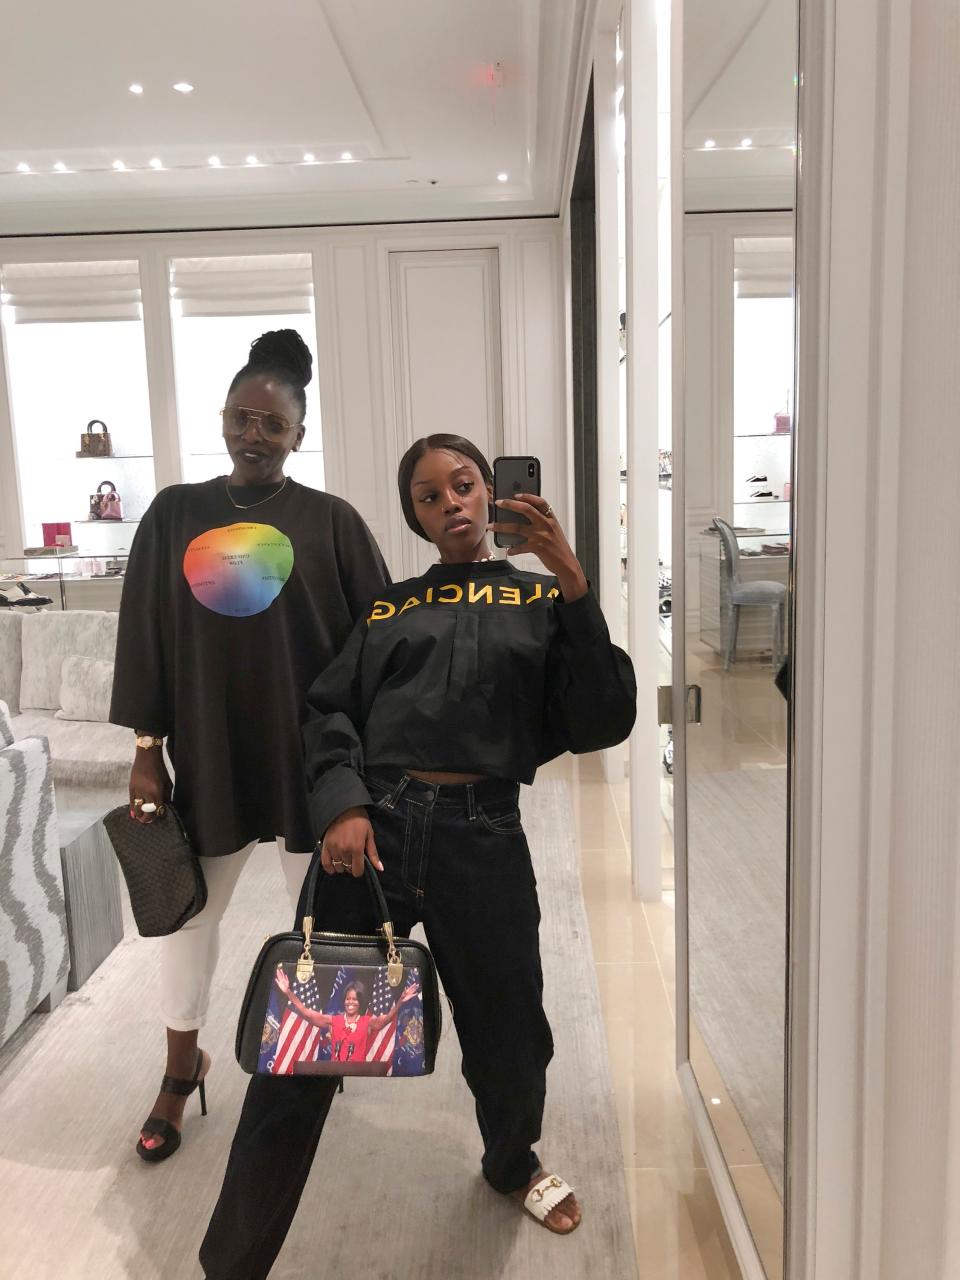 When mother wears Vetements and daughter goes for “big Mormon energy,” all bets are off.